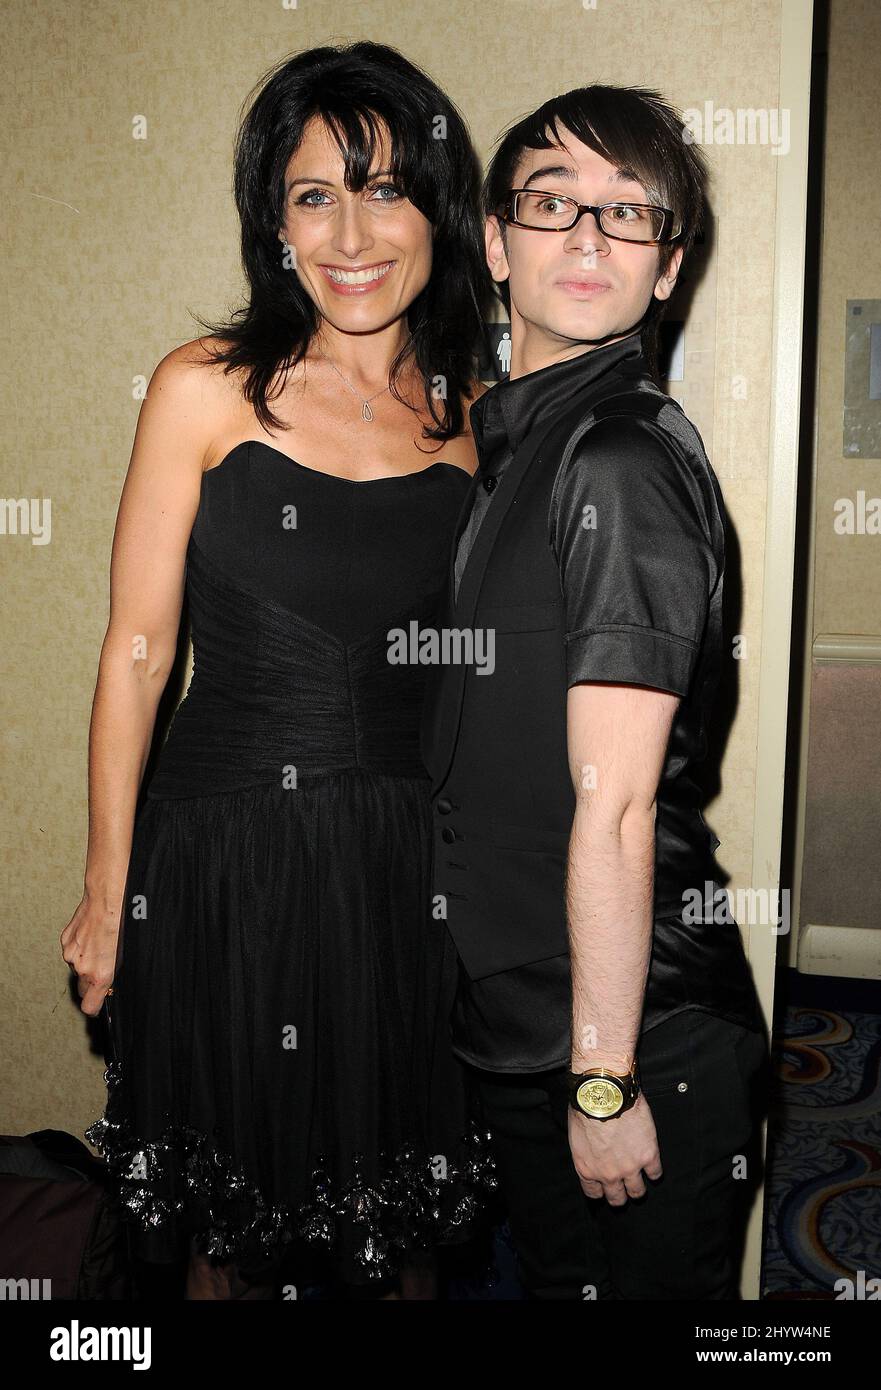 Lisa Edelstein and Christian Siriano at the 2009 Lucille Lortel Awards at The Marriott Marquis in New York. Stock Photo